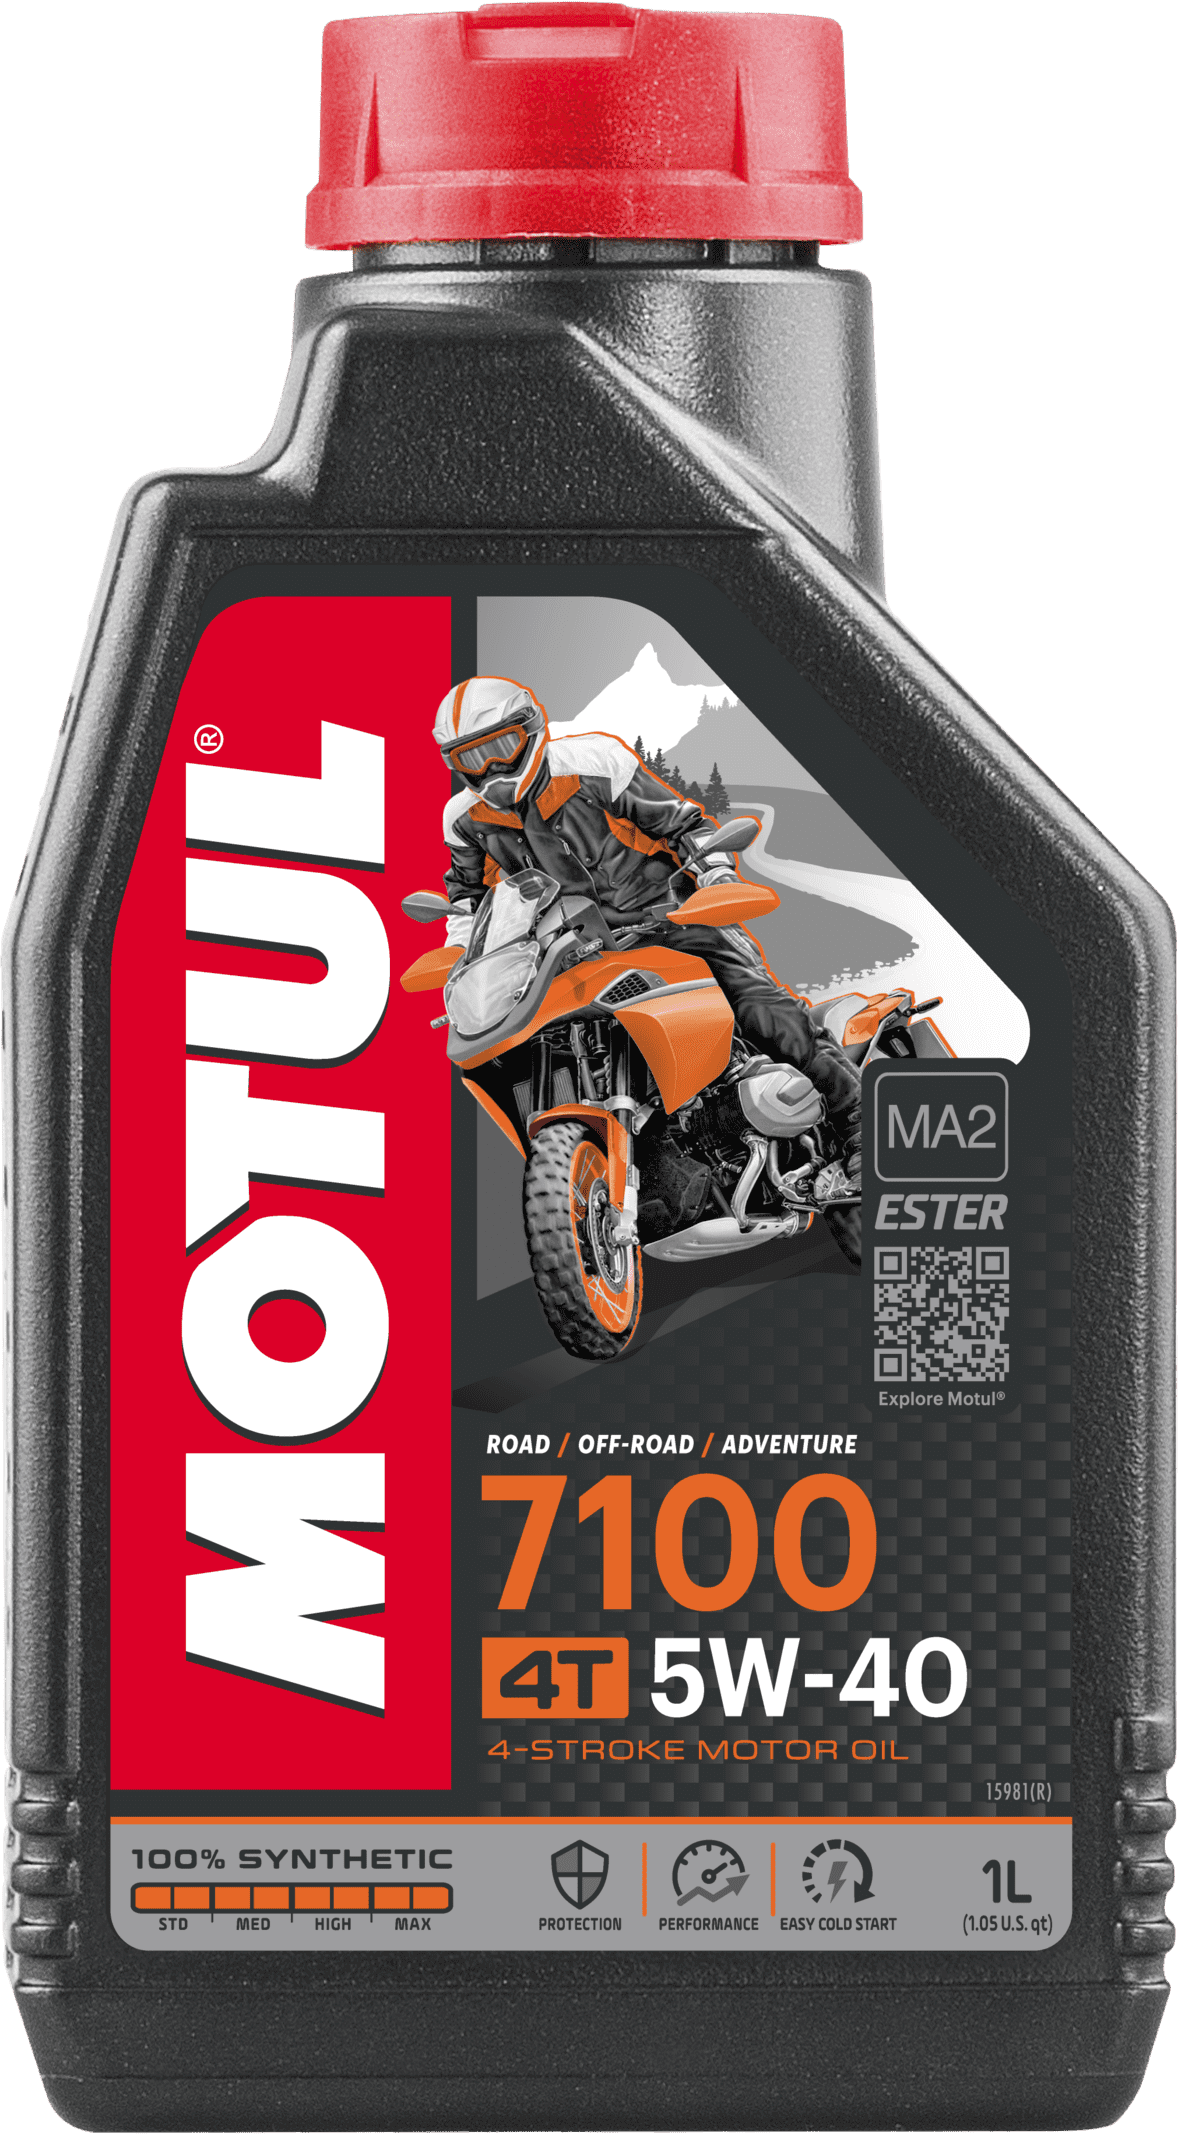 104086-1 100% Synthetic and Fuel Economy Engine lubricant based on Ester-Technology.